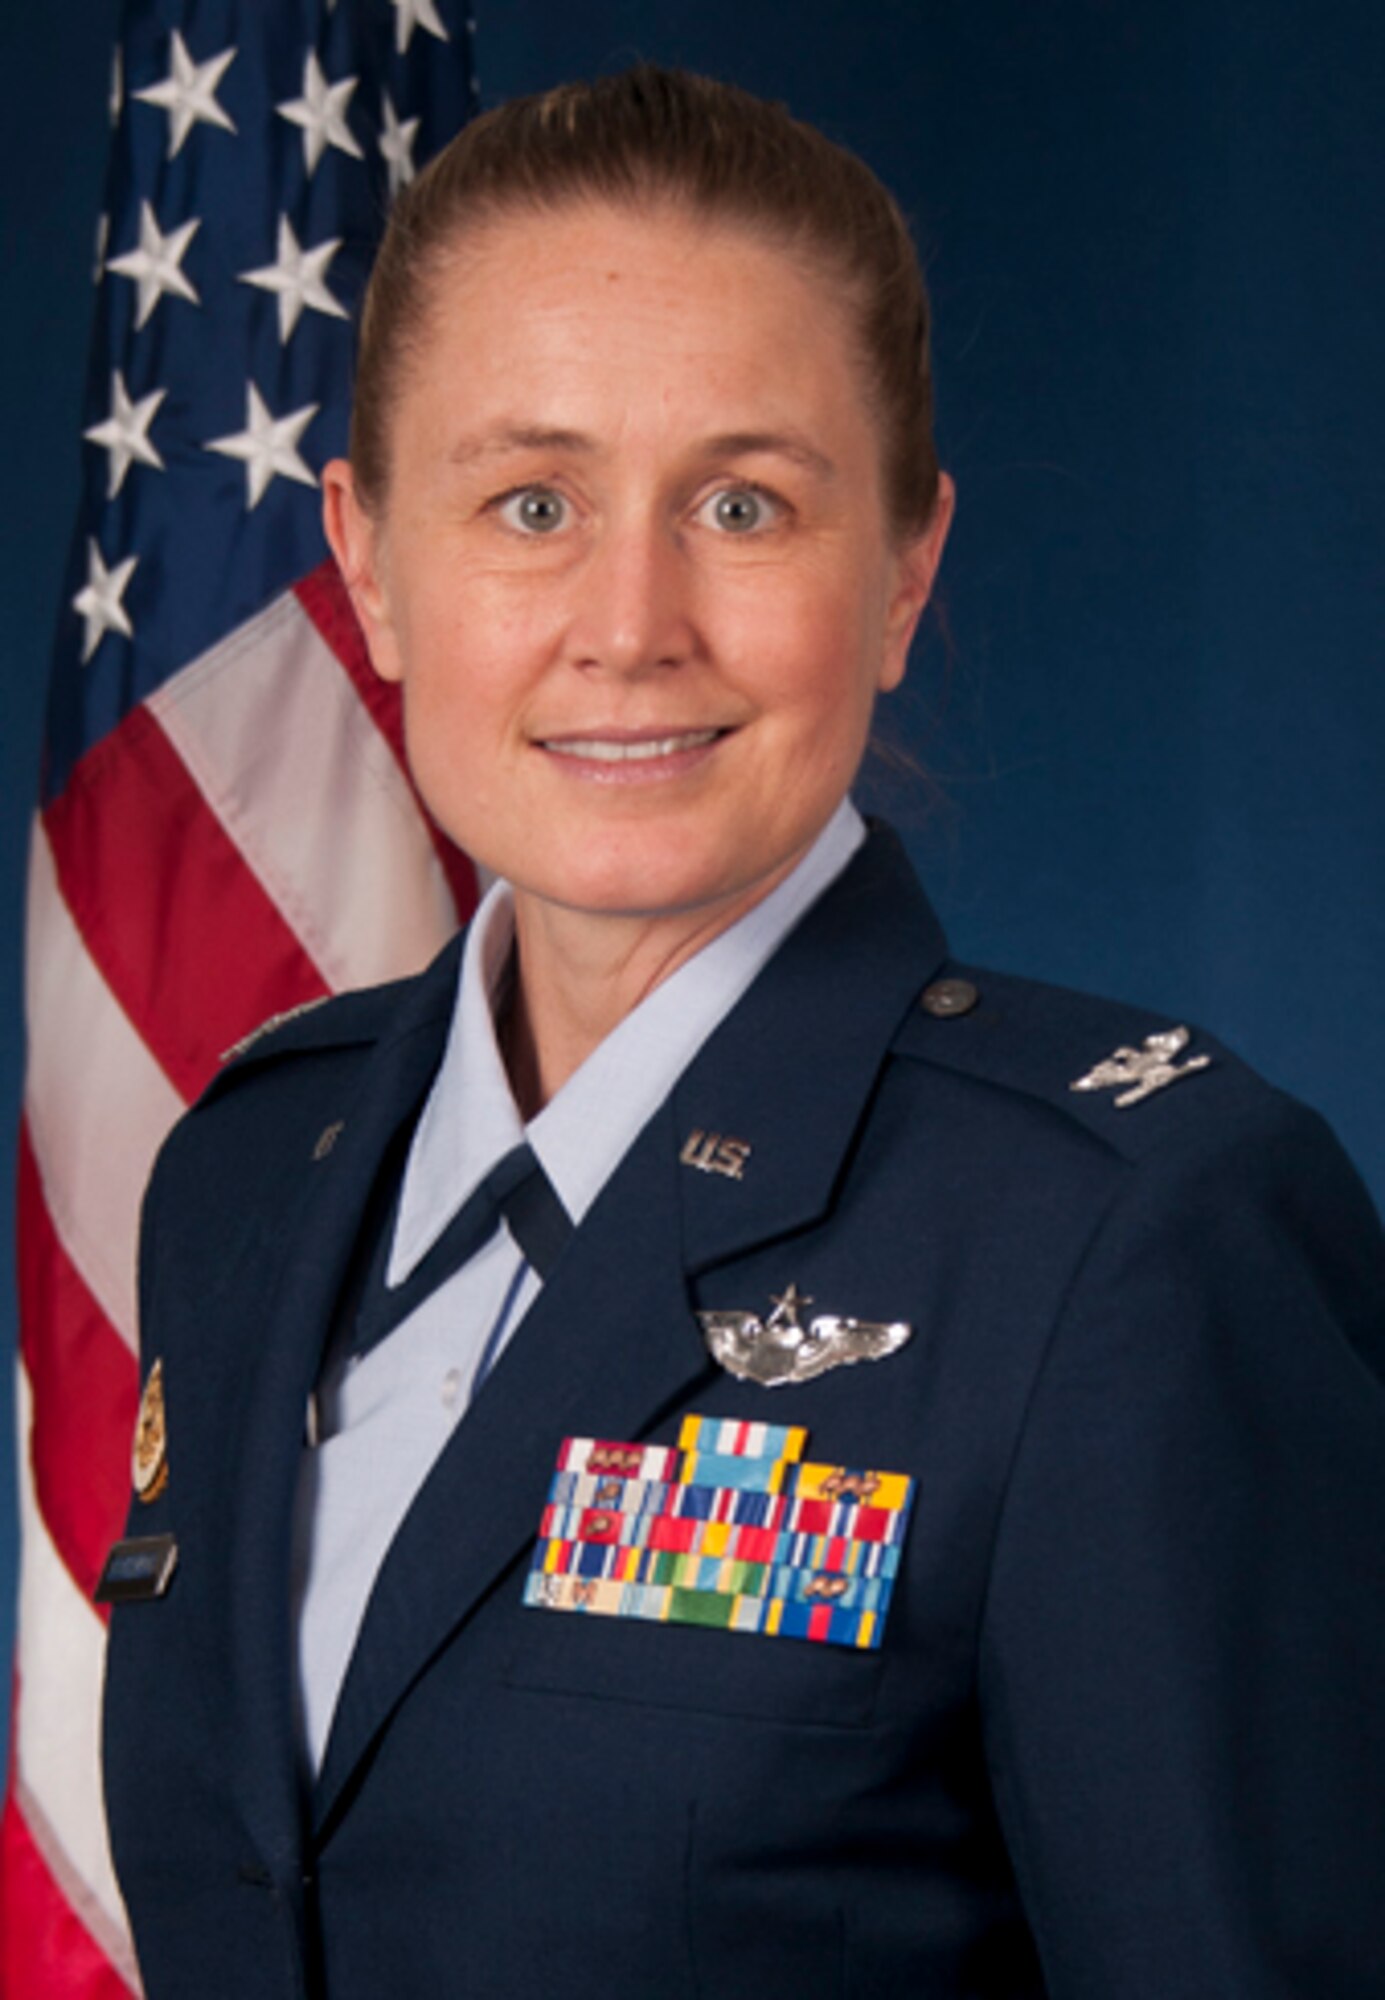 Col. Bobbi Doorenbos, currently the commander of the Arizona Air National Guard’s 214th Reconnaissance Group, will take command of the 188th Wing January 2015, it was announced Dec. 7, 2014. (Courtesy photo)